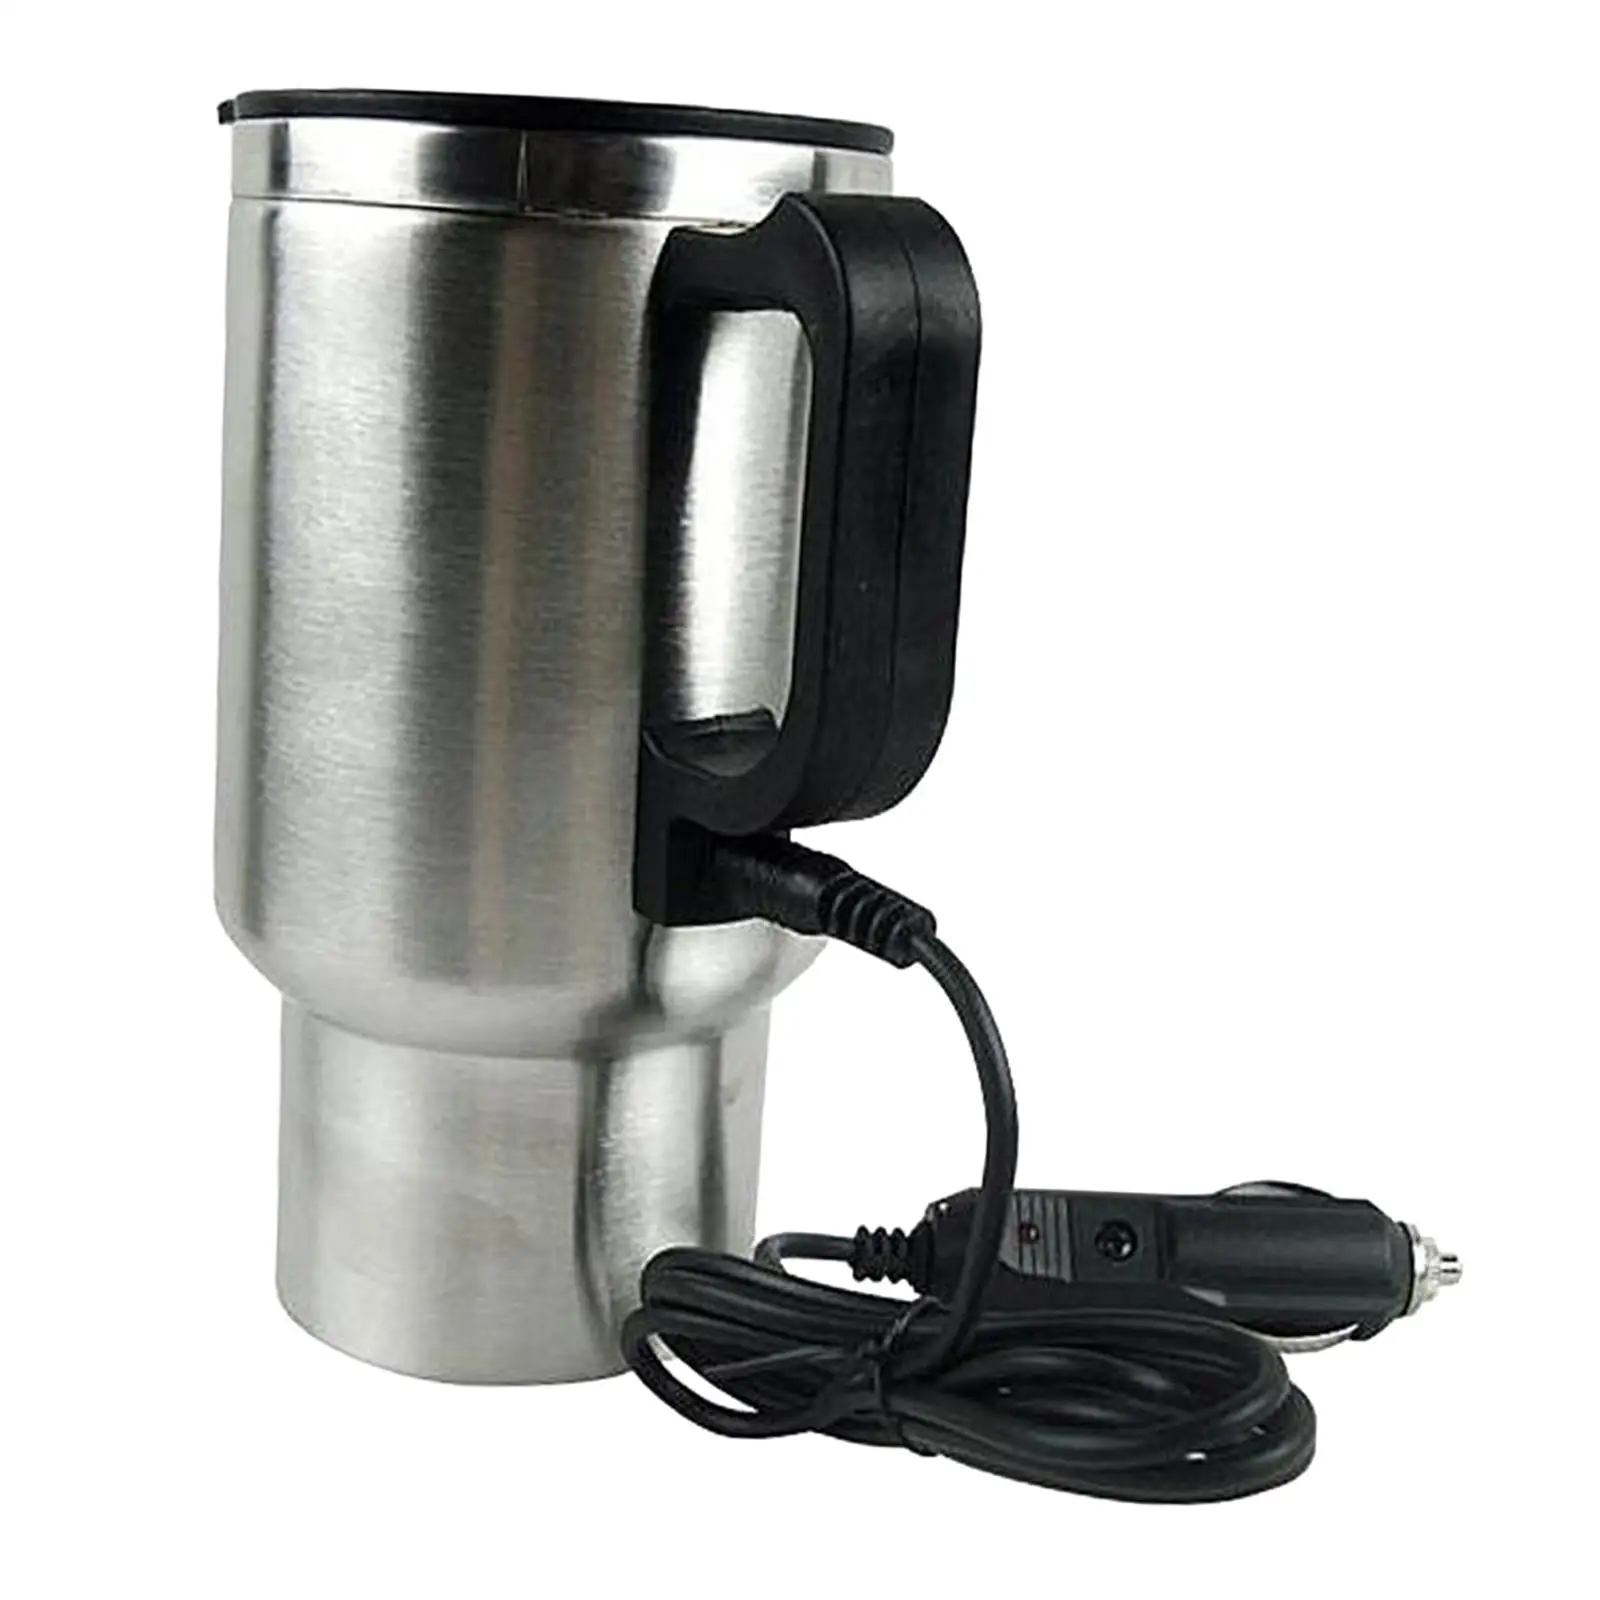 12V 480ml Car Electric Kettle Heated Travel Mug 4.7x6inch Drinking Cup for Drivers, Business Man Good Insulation Effect